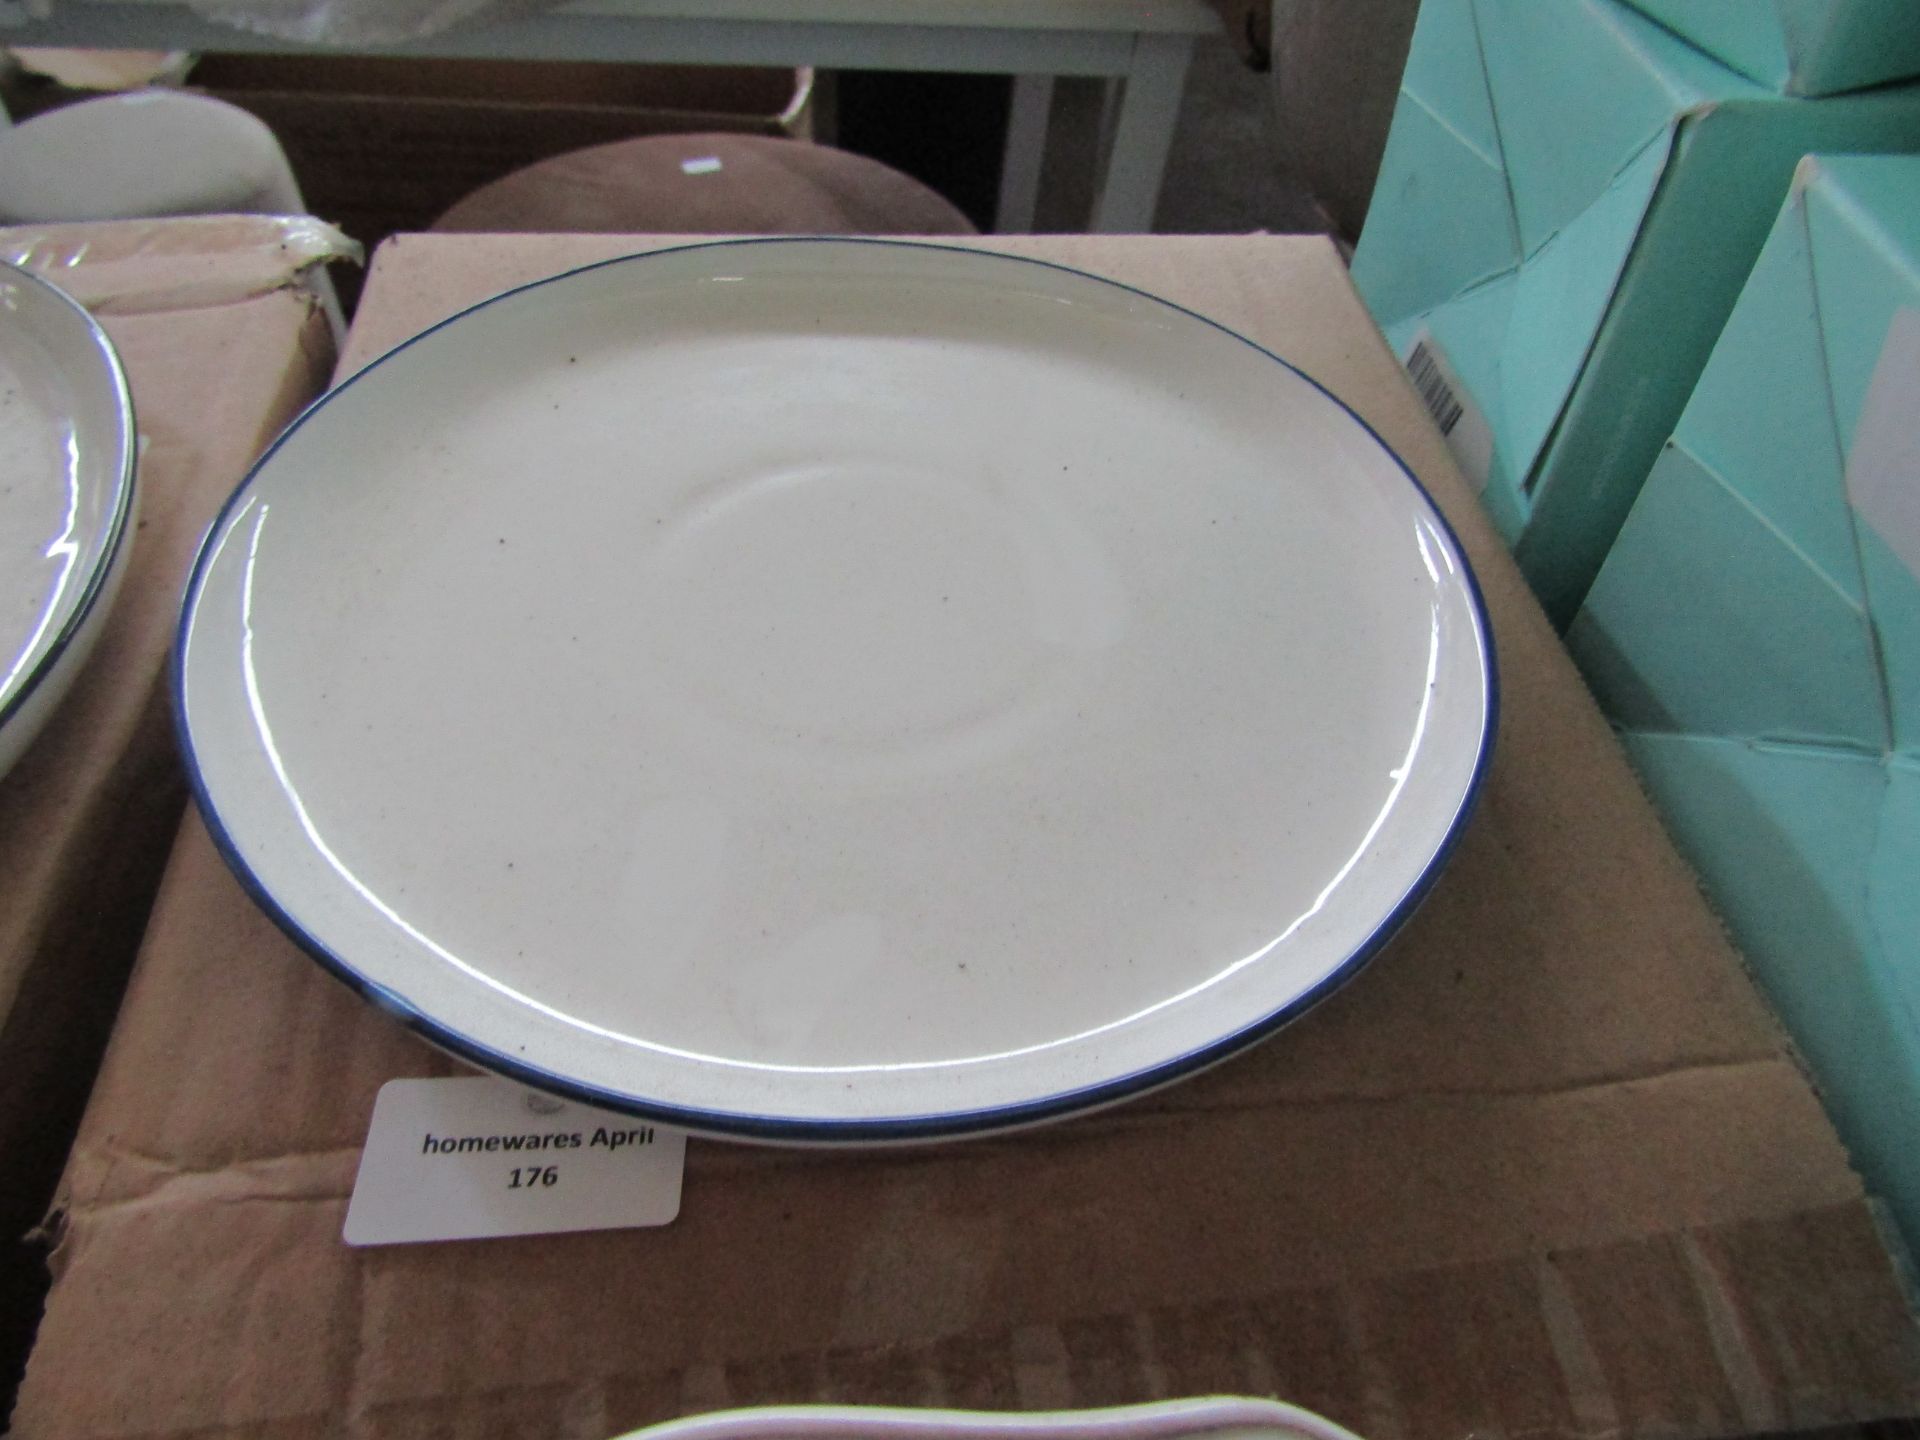 2 x Homeware Outlet Ex-Retail Customer Returns Mixed Lot - Total RRP est. 100About the Product(s) - Image 2 of 2